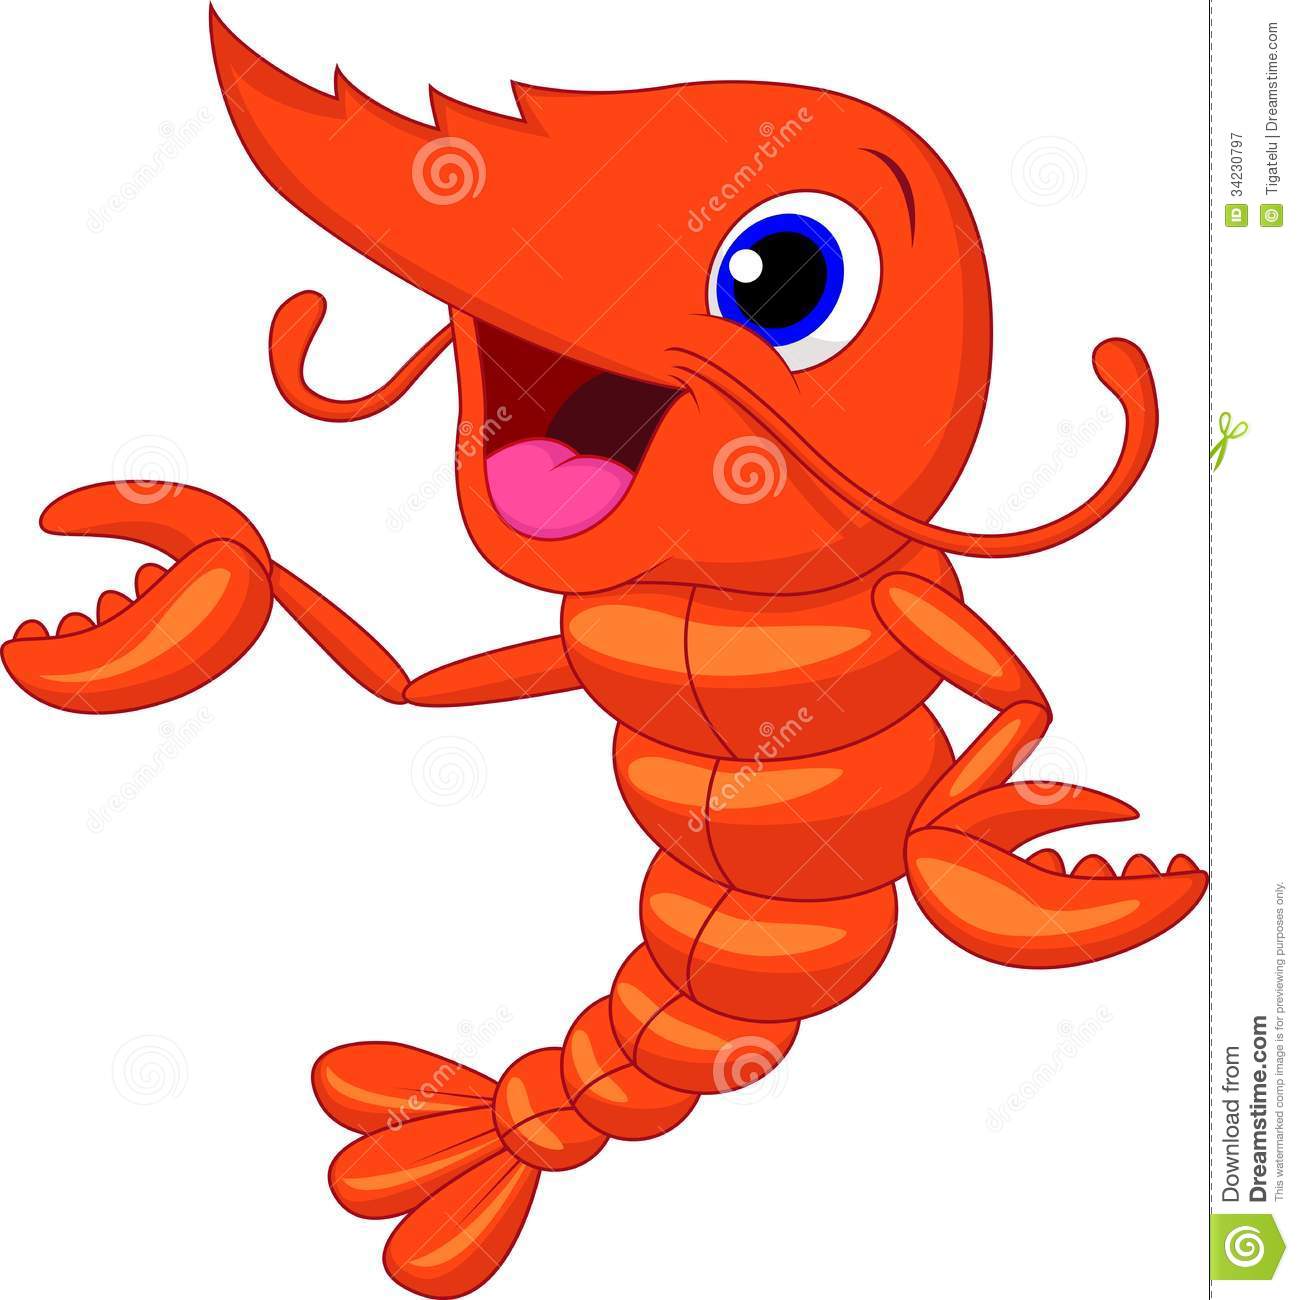 Cooked Shrimp Clipart   Clipart Panda   Free Clipart Images